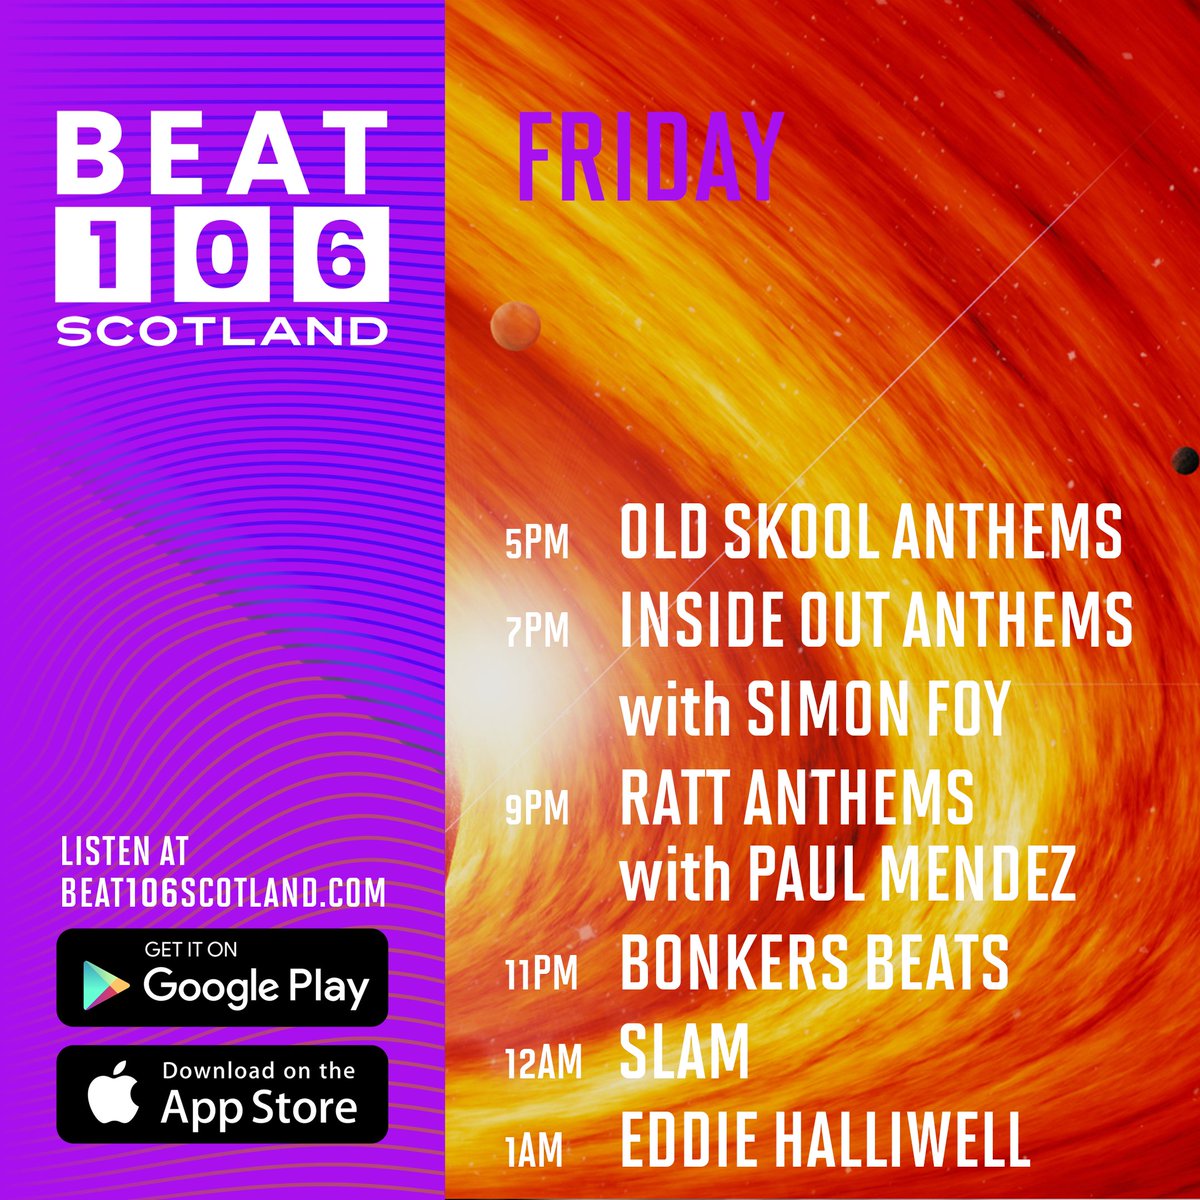 Friday night on @beat106scotland!

Now - 2 hours of #OldSkool Anthems
7pm - Simon Foy is in the mix - @insideoutgla Anthems.
9pm - #RATTAnthems with @paulmendez
11pm - Bonkers Beats with @deckheaddj @Bonkers4life 
12am - @slam_djs with @rebeccadellepiane__
1am - @eddiehalliwell